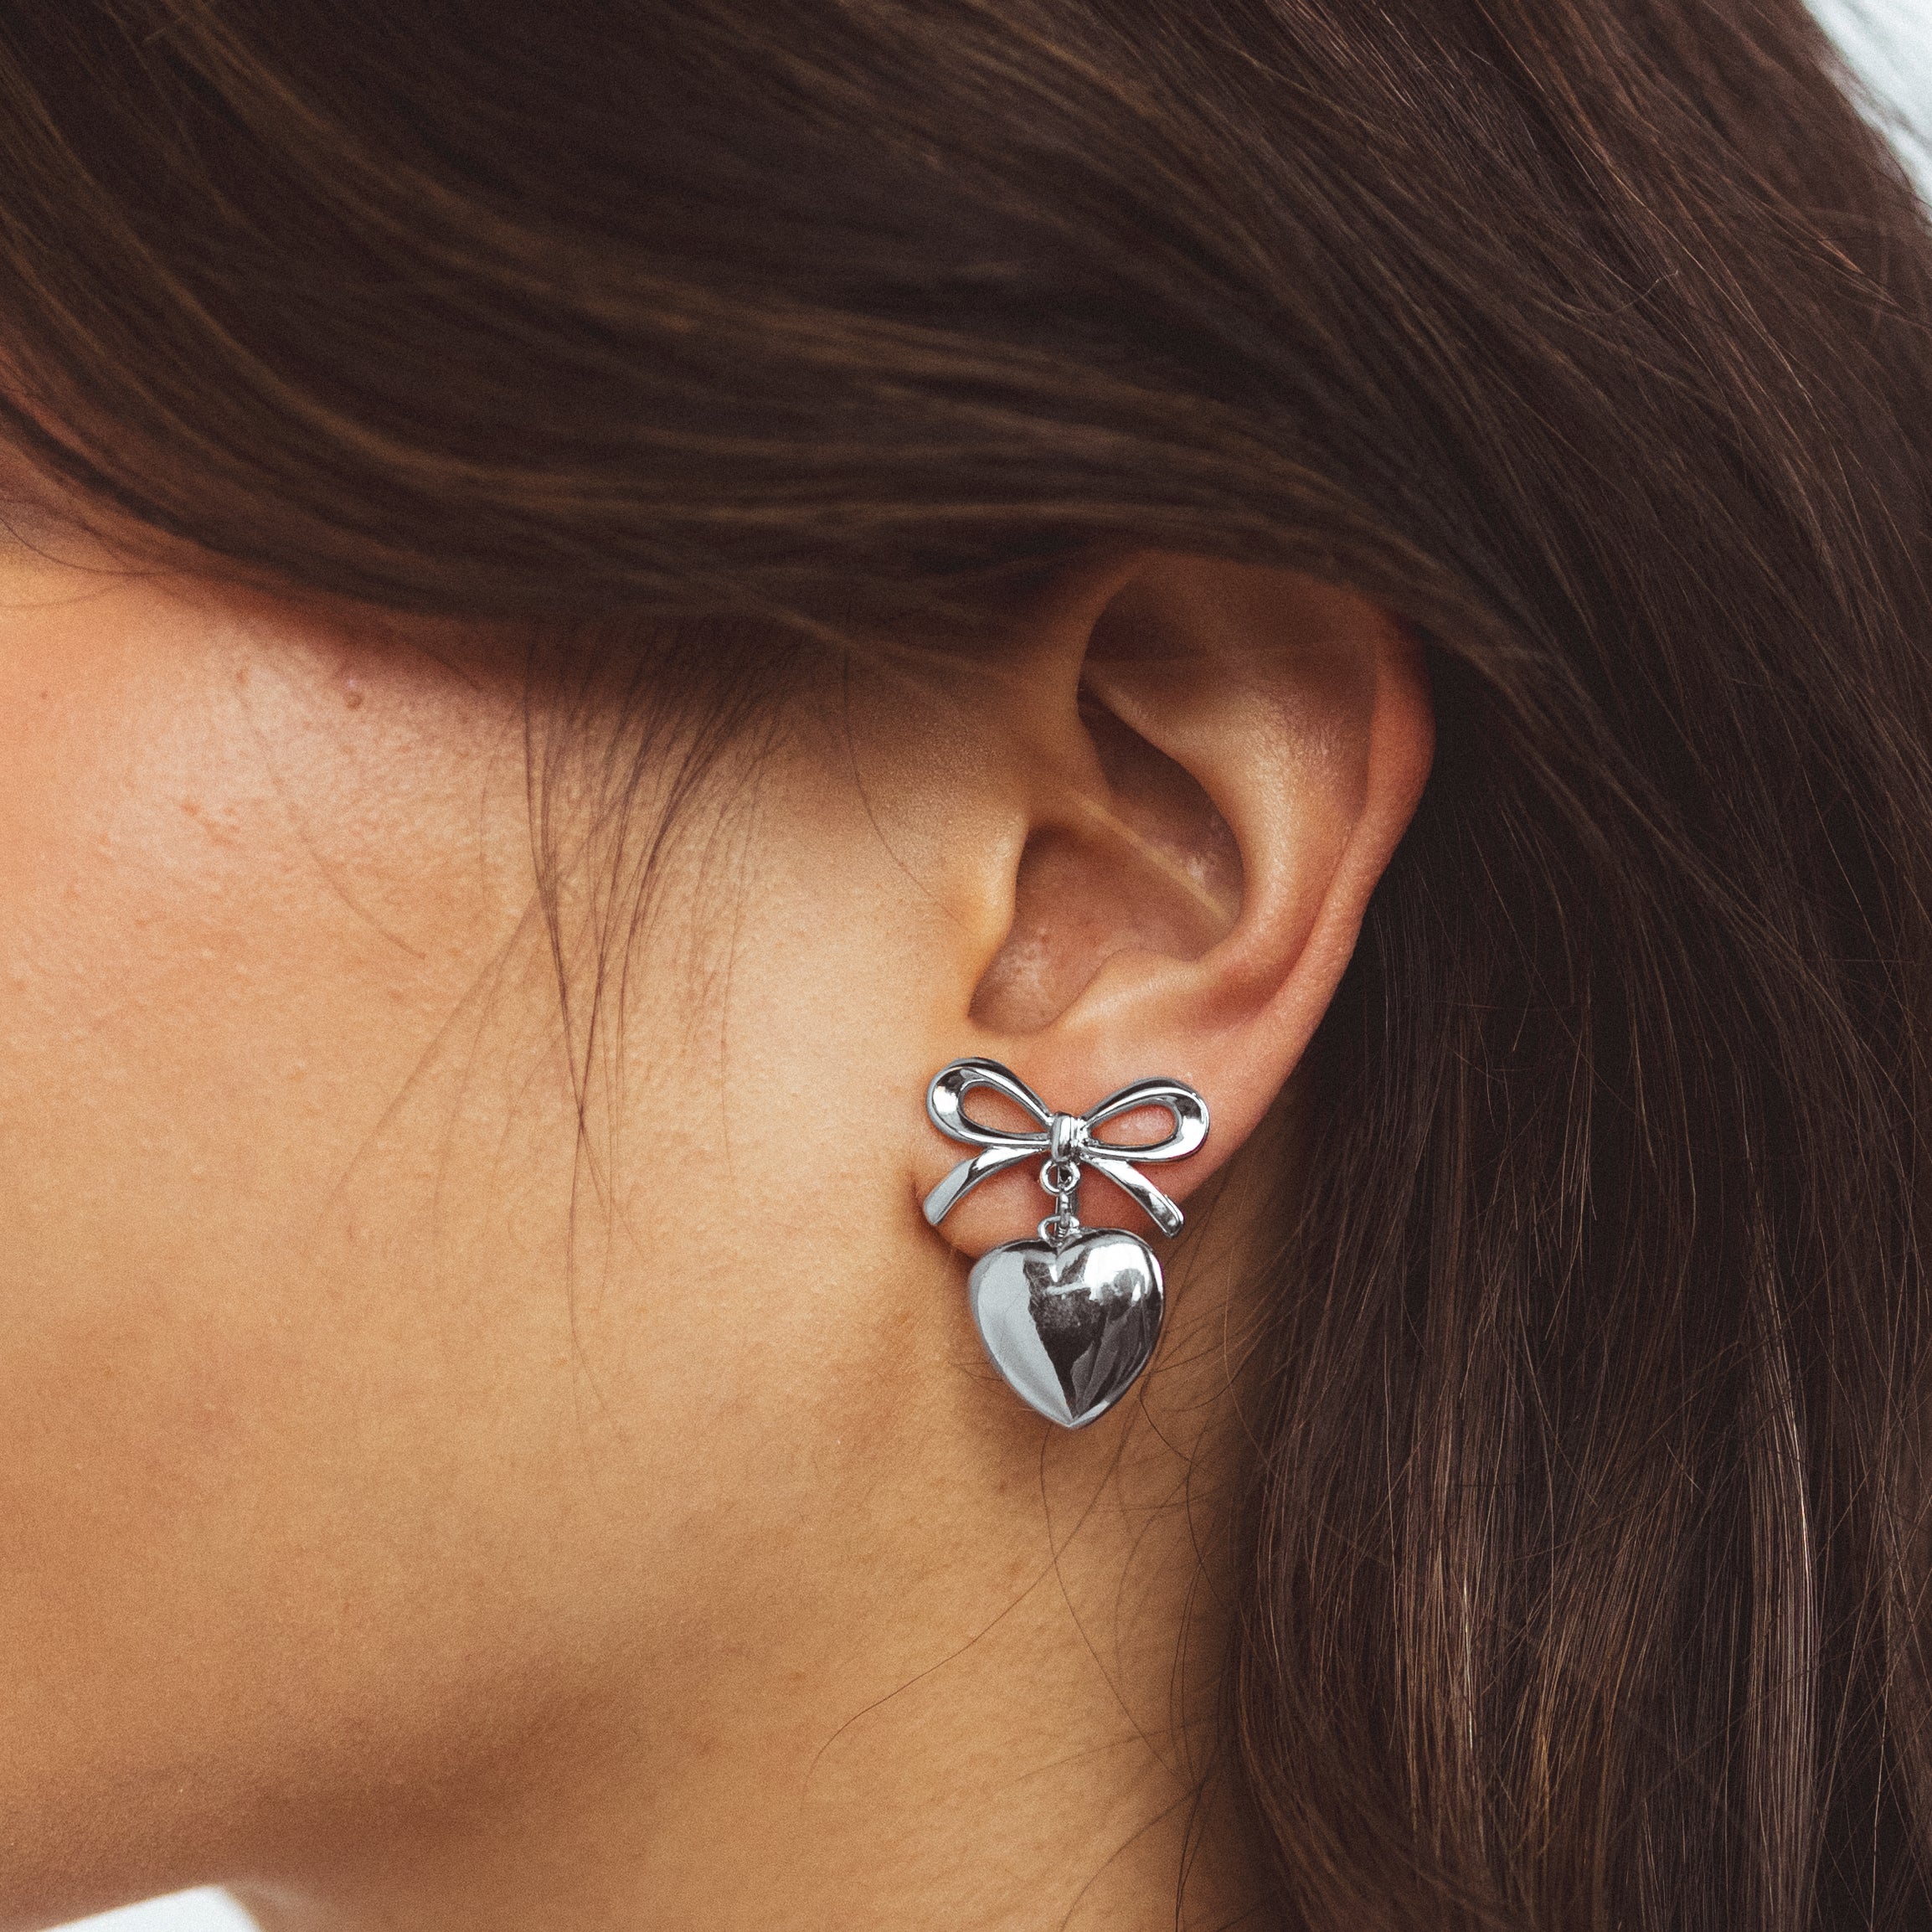 A model wearing the Venus Clip On Earrings. Specially designed for sensitive or stretched ears, these earrings ensure a secure 24-hour hold and customizable fit for unmatched comfort. Elevate your style with effortless elegance.